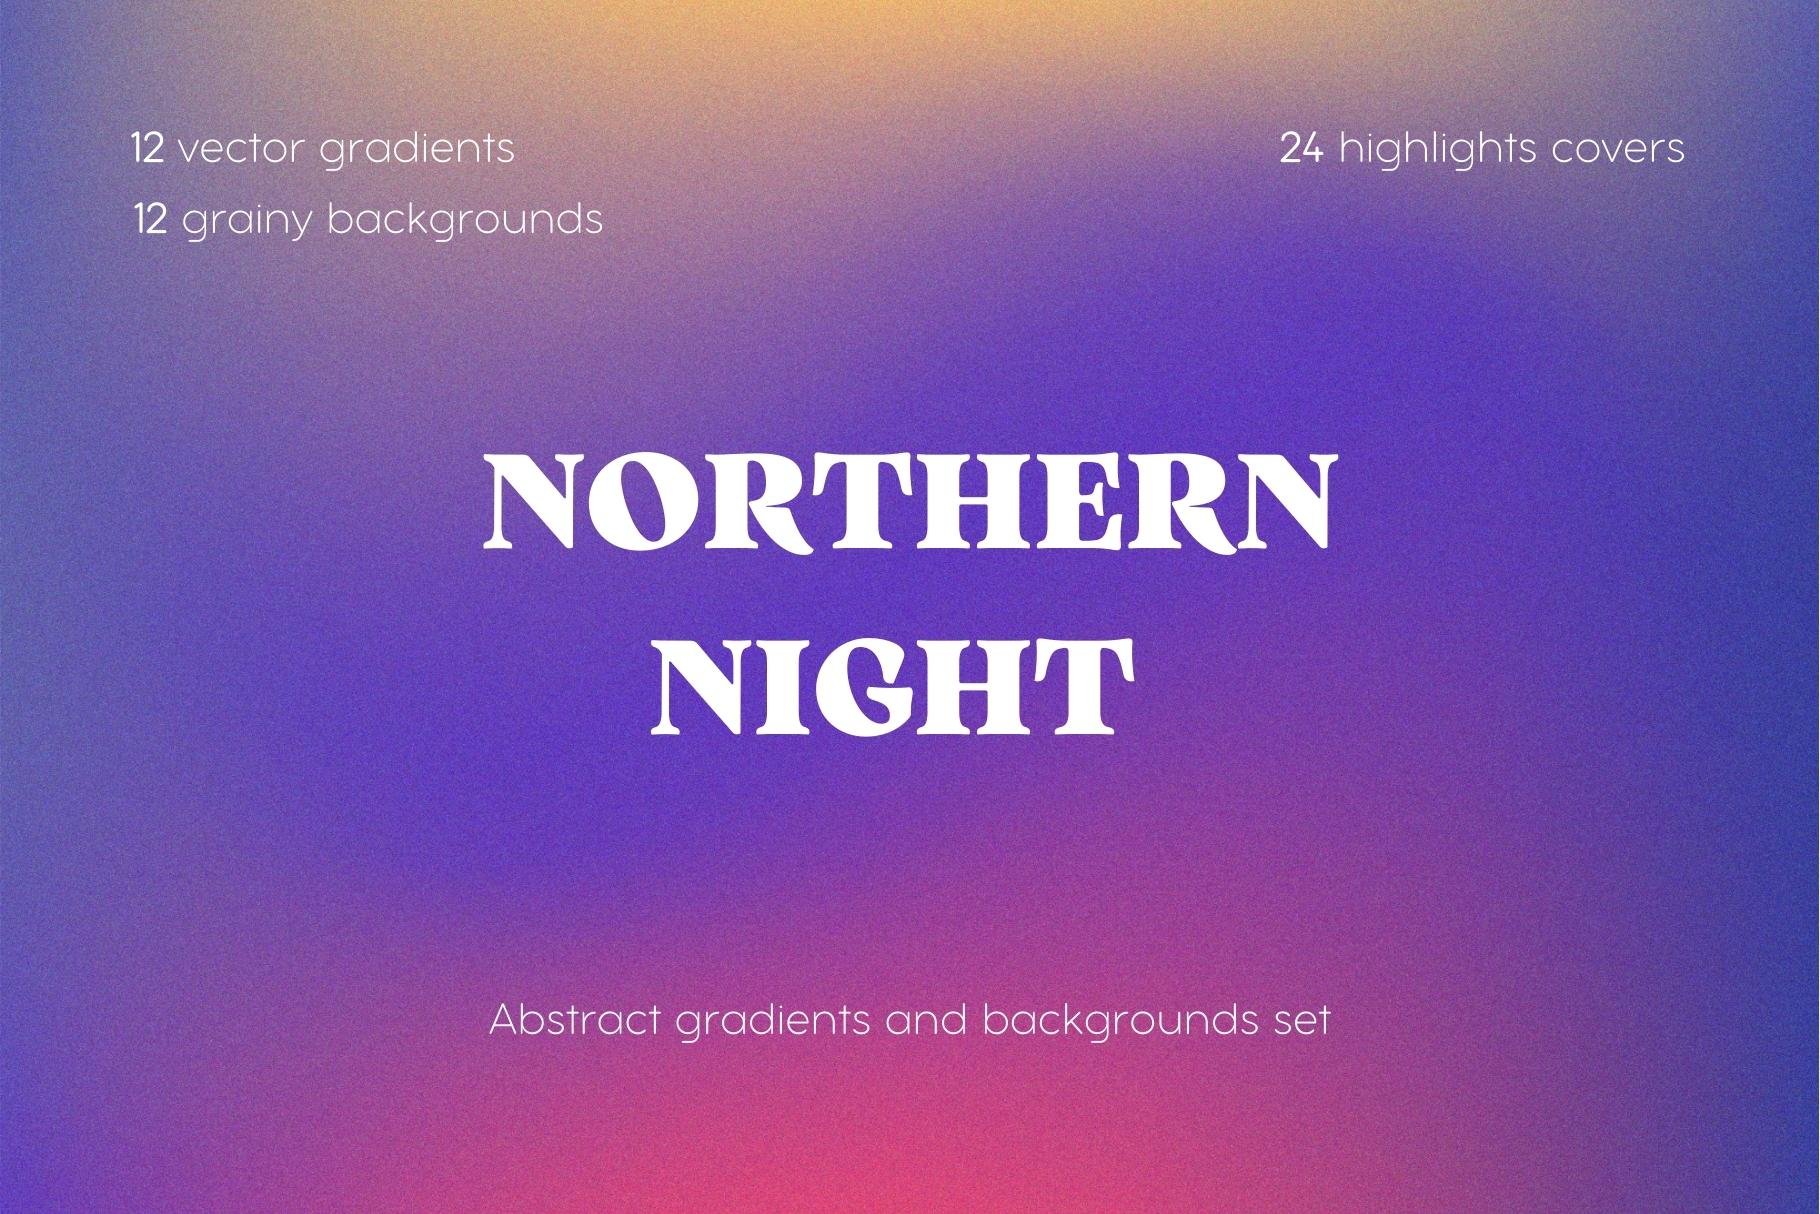 Abstract gradients and backgrounds cover image.